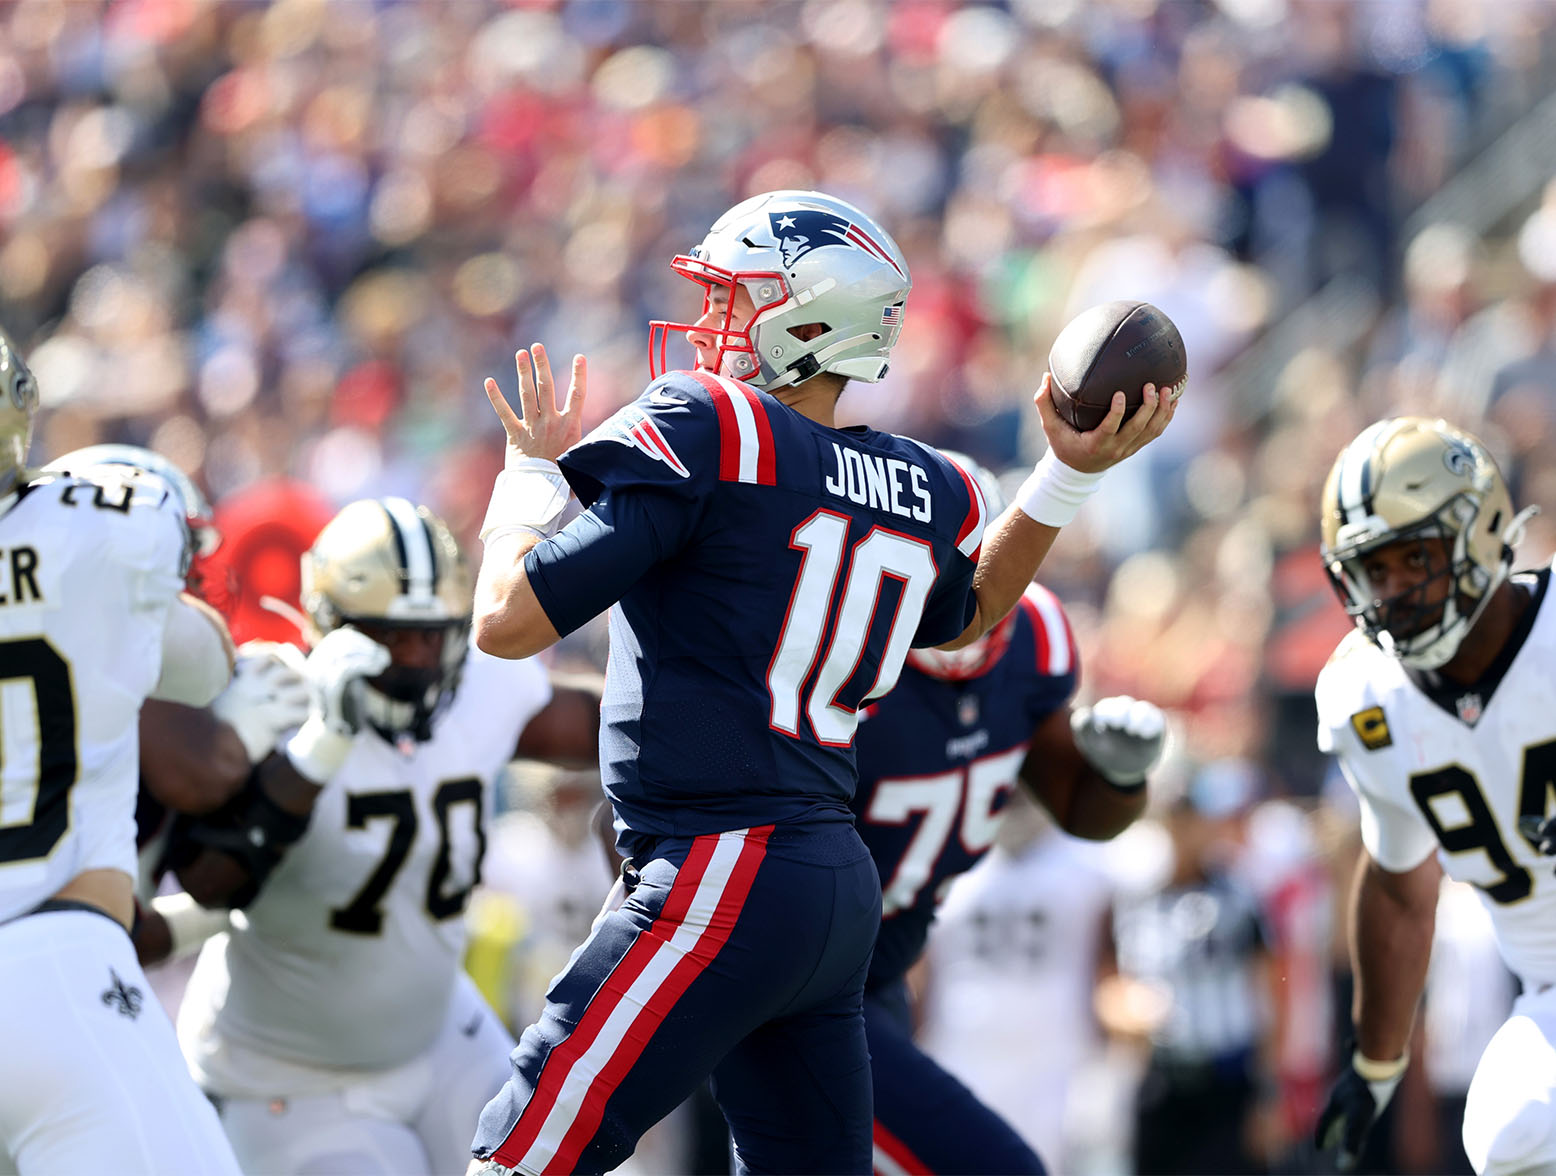 FOXBOROUGH, MASSACHUSETTS - SEPTEMBER 26: Quarterback Mac Jones #10 of the New England Patriots passes the ball against the New Orleans Saints in the first quarter of the game at Gillette Stadium on September 26, 2021 in Foxborough, Massachusetts. (Photo by Elsa/Getty Images)